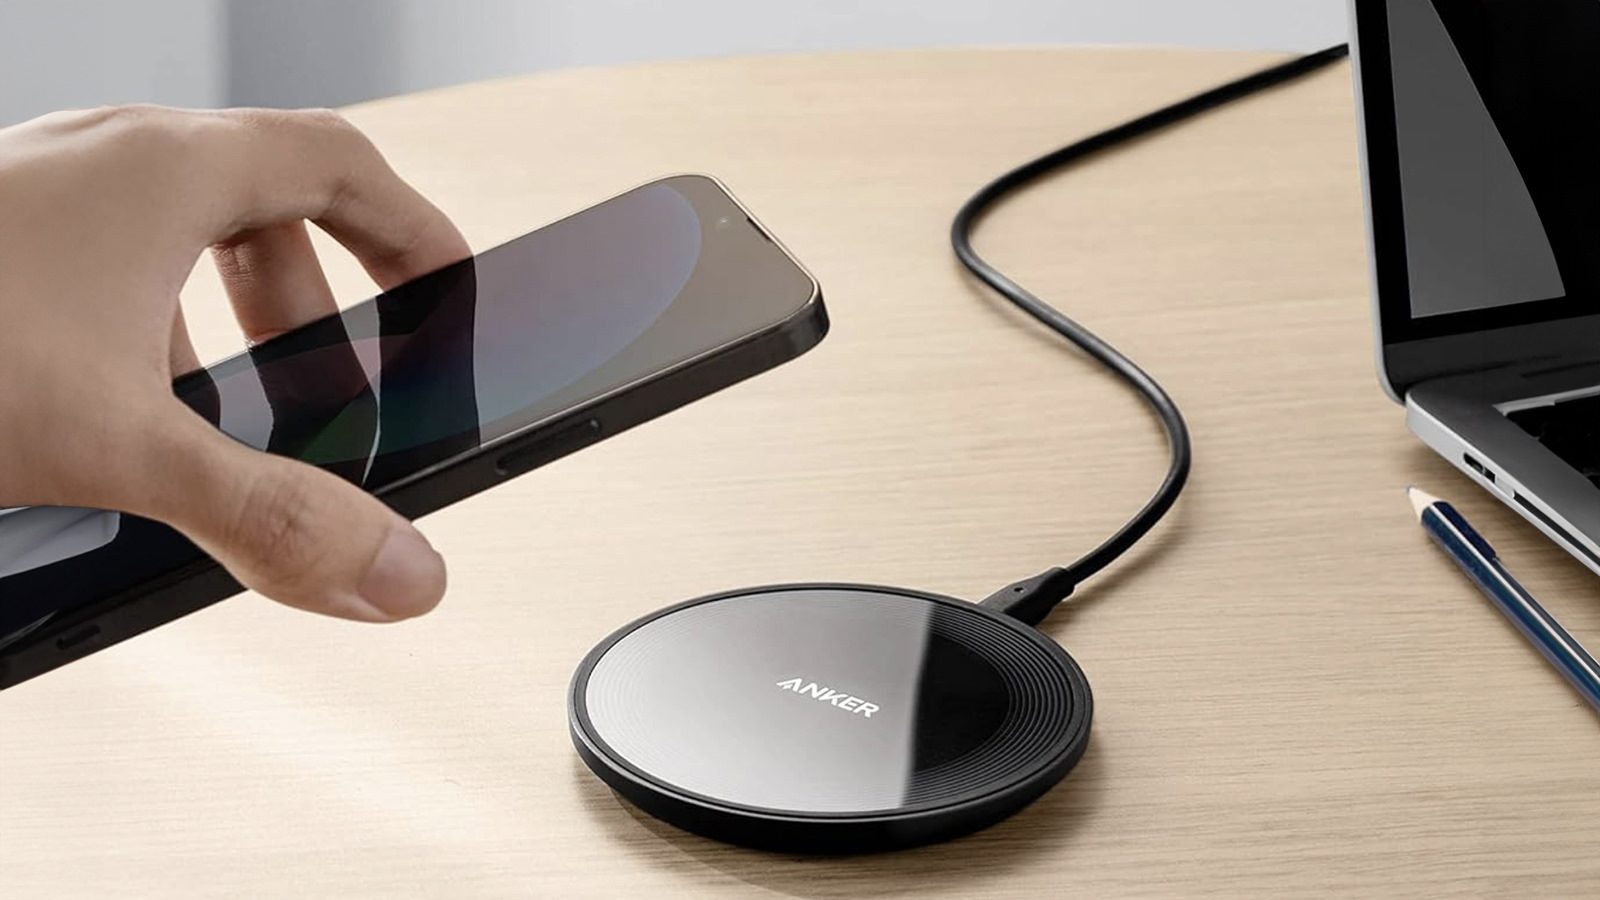 Anker 315 Wireless Charger